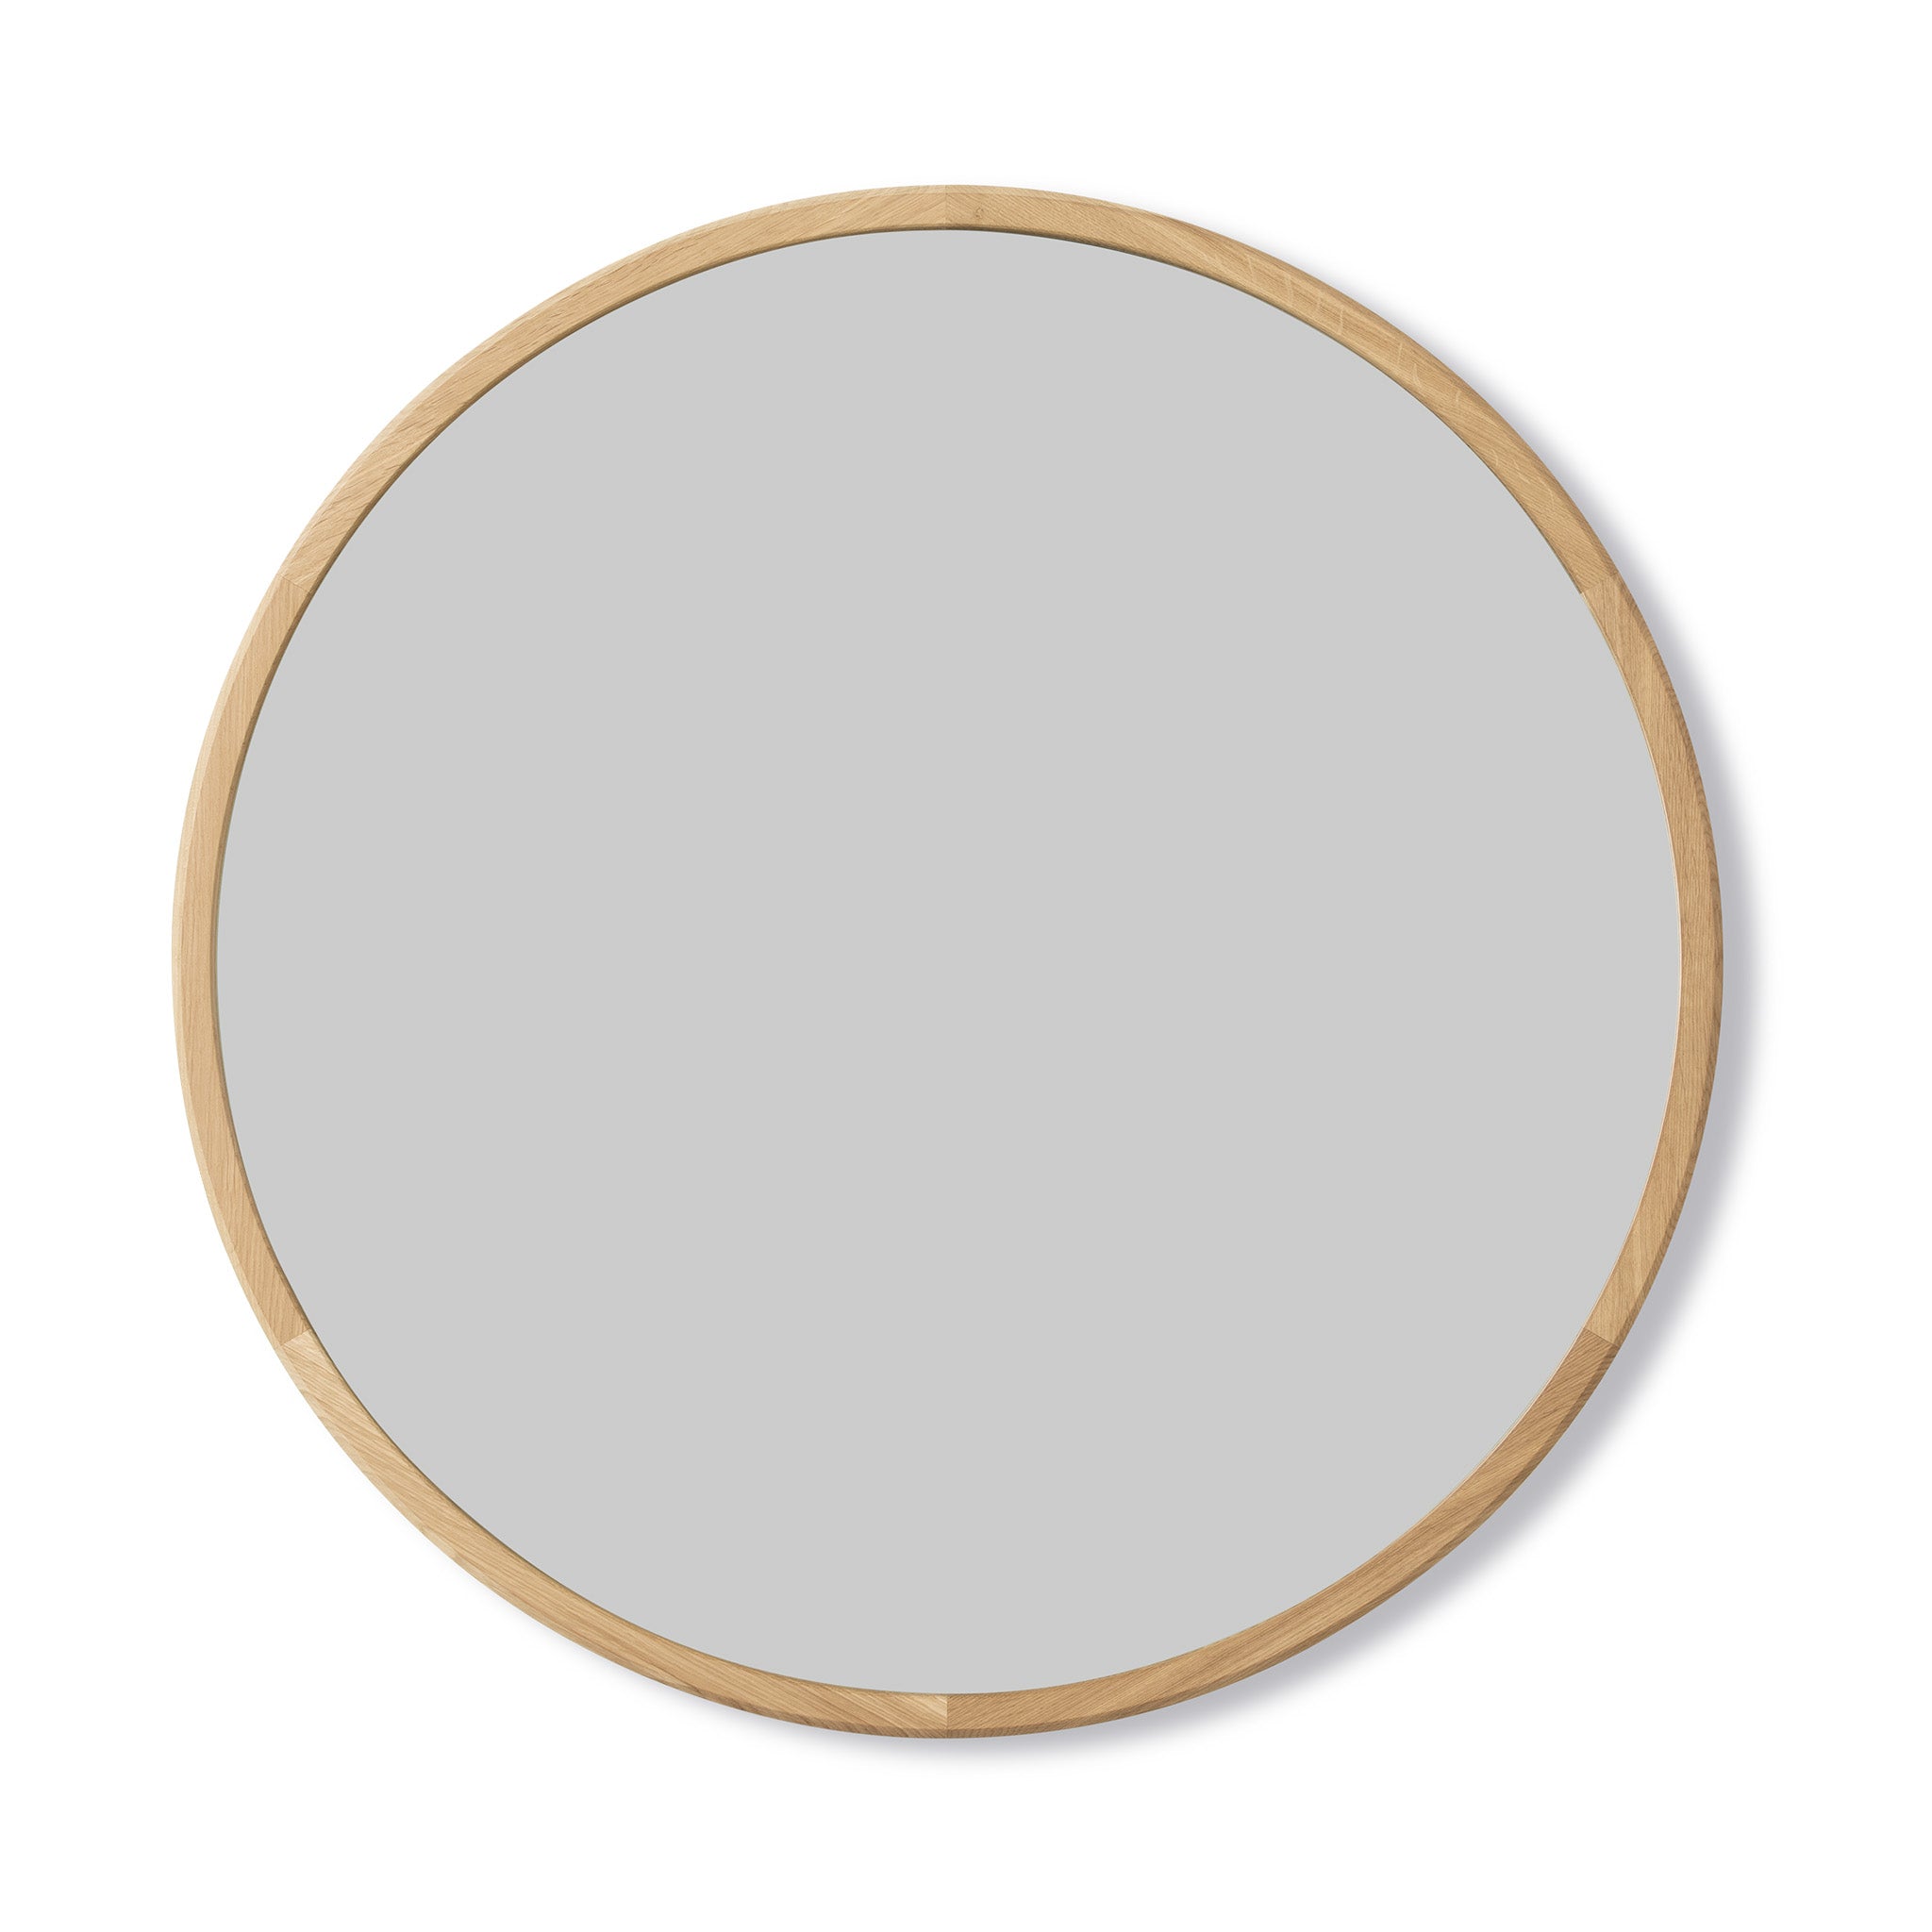 Silhouette Mirror Round By OEO Studio